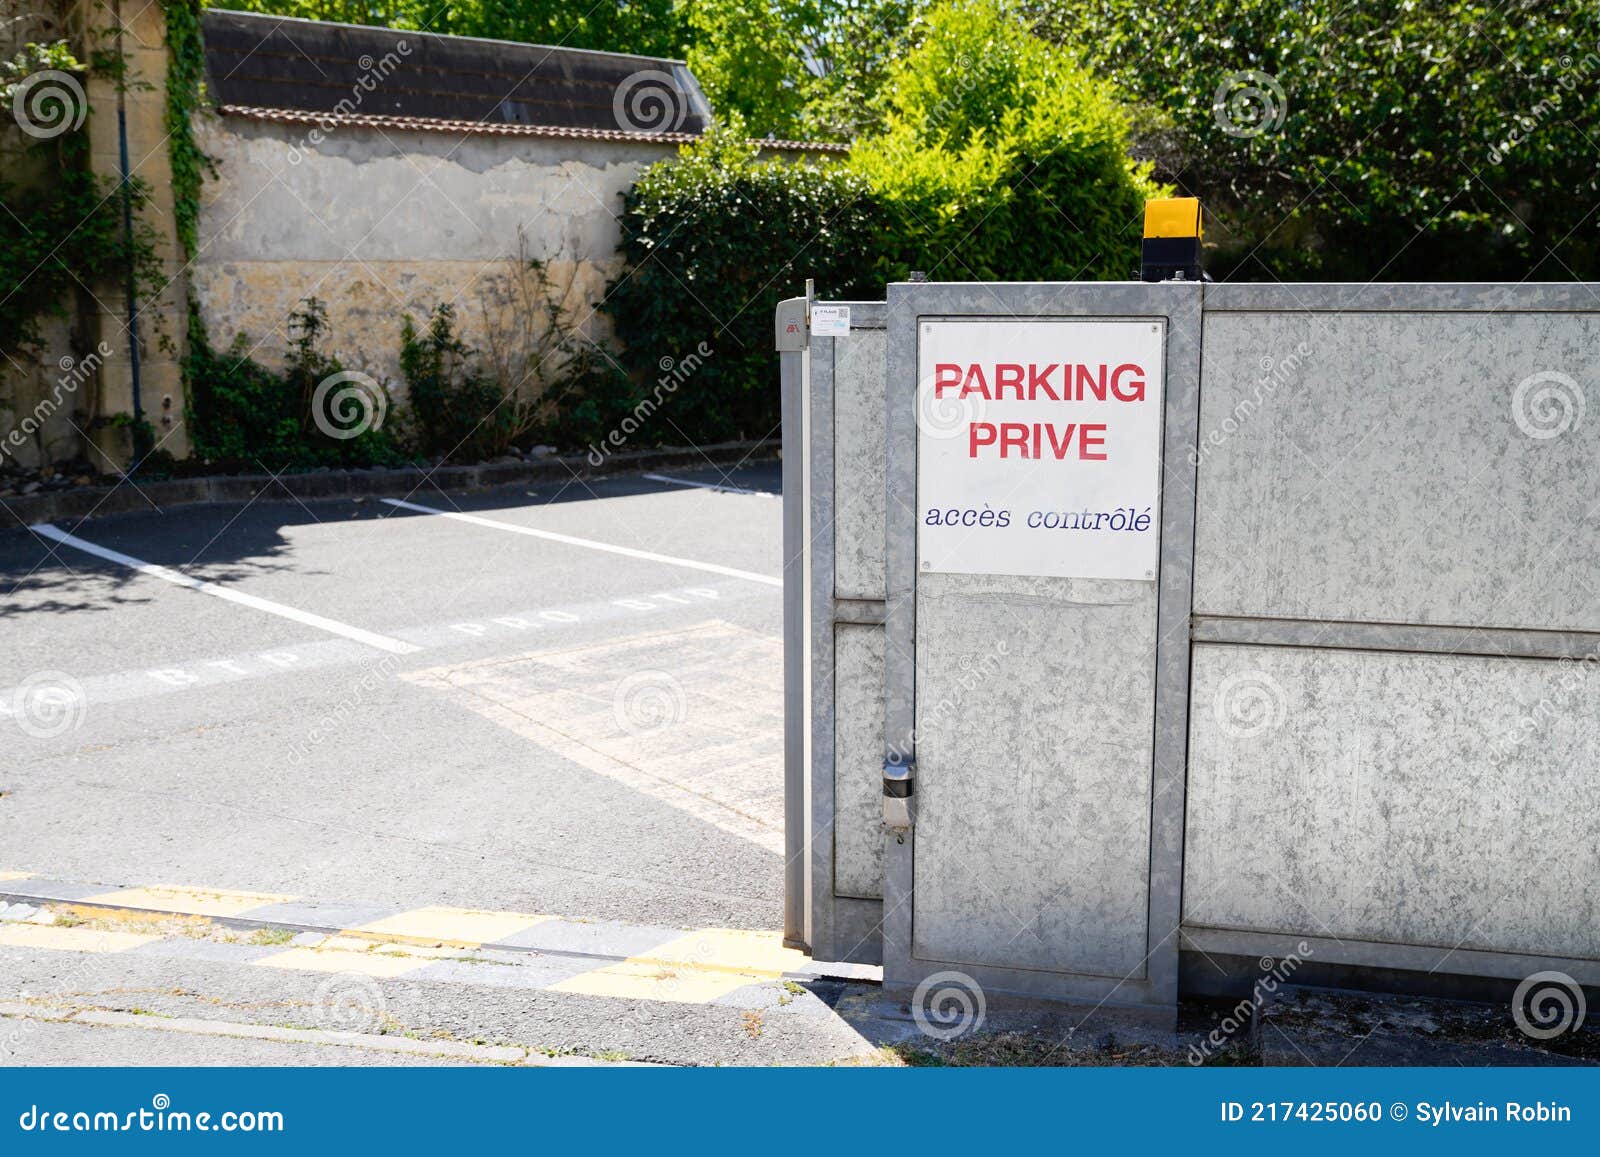 parking prive sign text in french door steel portal open means parking private forbidden acces sign